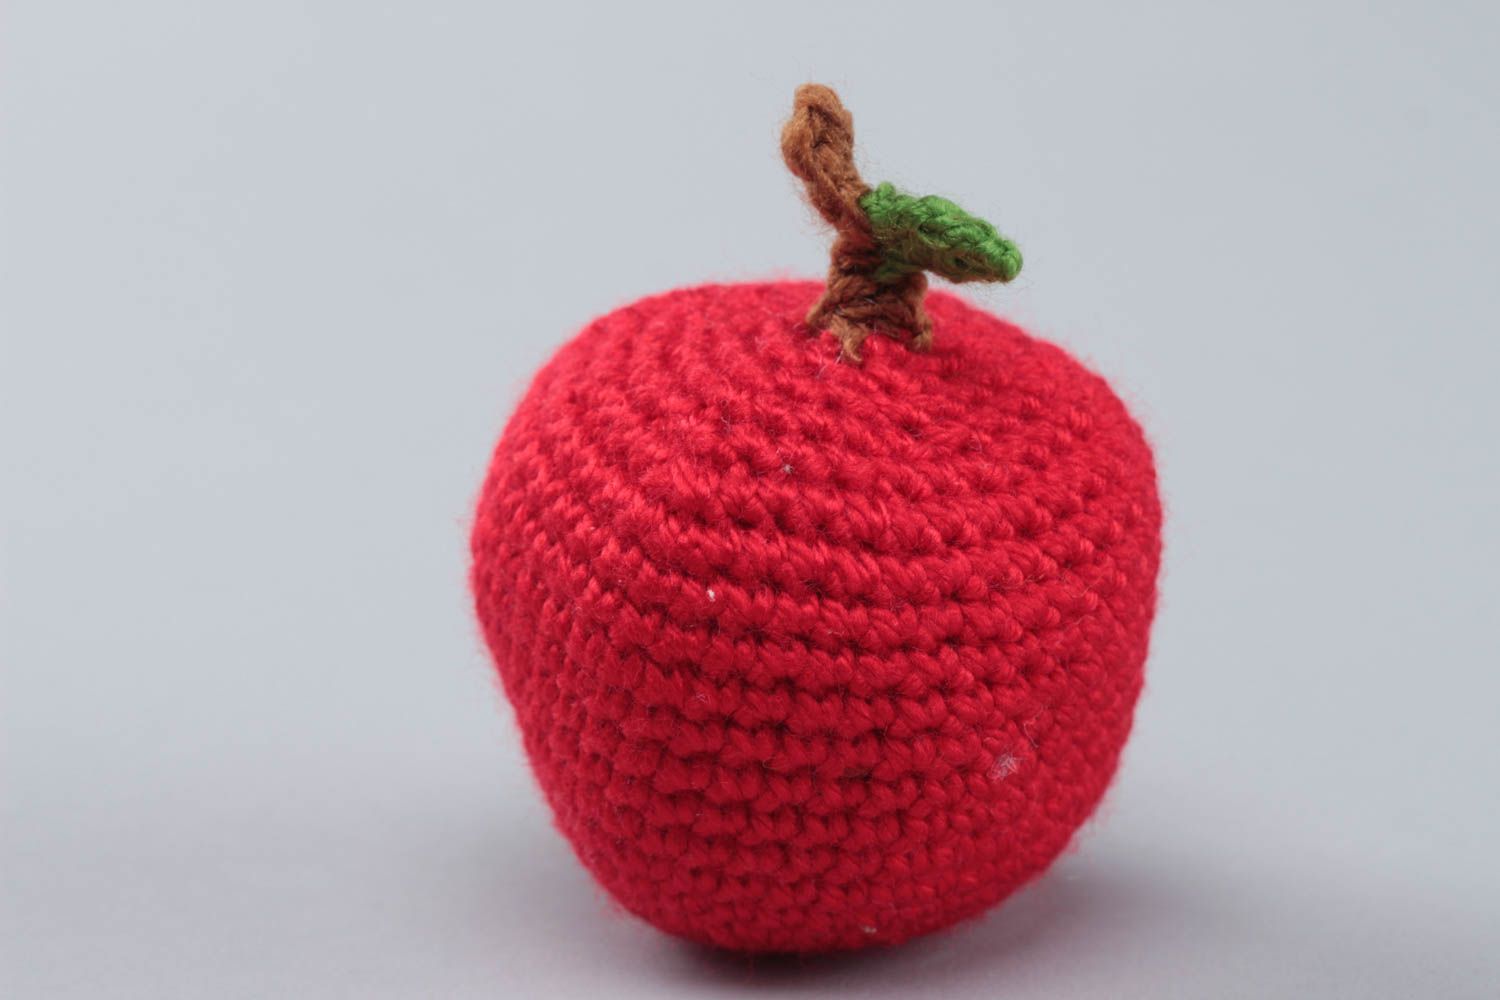 Handmade small crochet soft toy red apple for kids and interior decoration photo 2